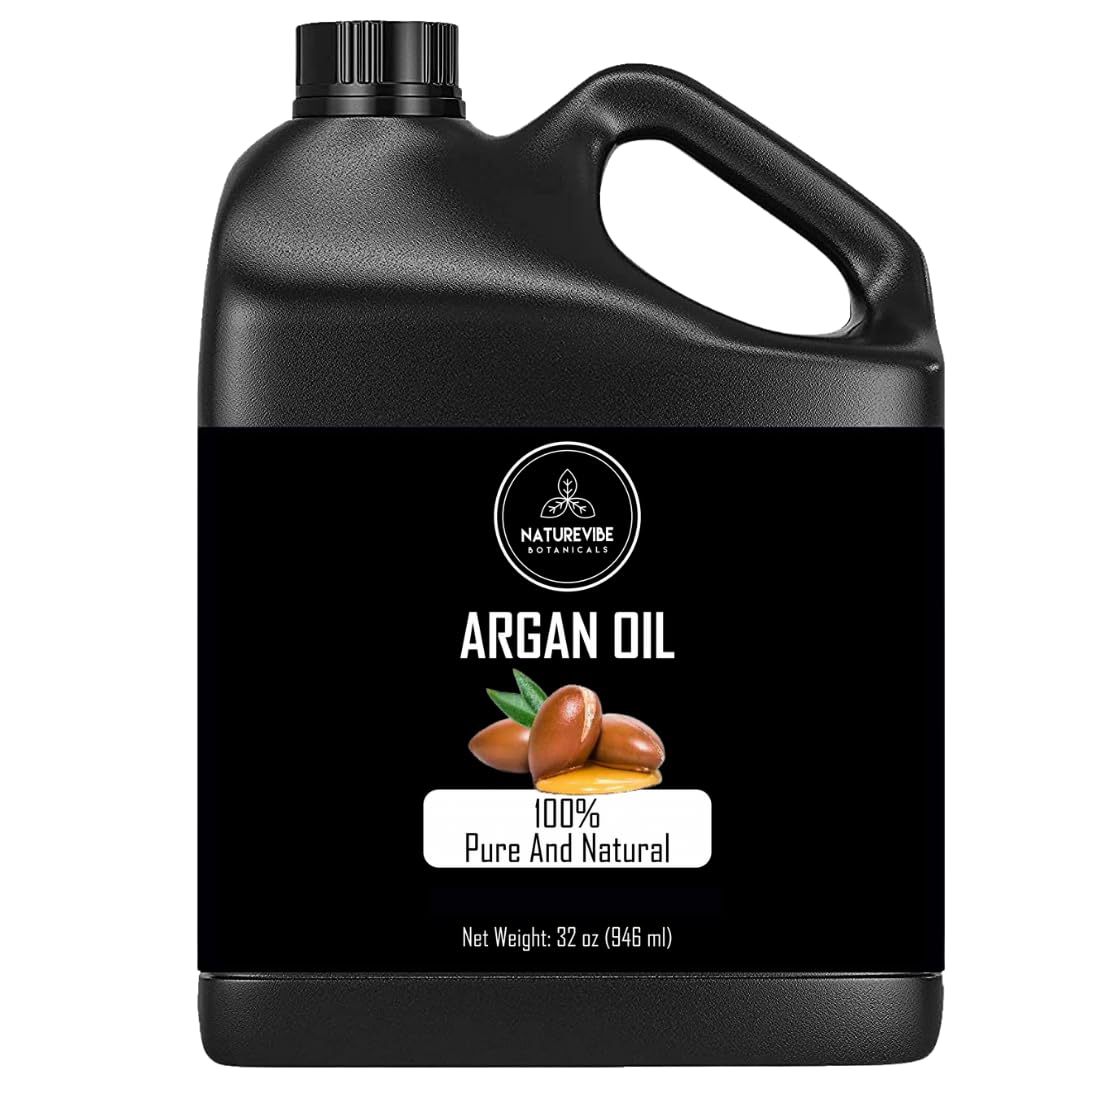 Naturevibe Botanicals Argan Oil 32 Ounces 100% Pure & Natural Morocco Oil | Cold Pressed | Great for Skin, Nails & Hair | Non-Greasy Body Oil | Face Moisturiser (946 ml)